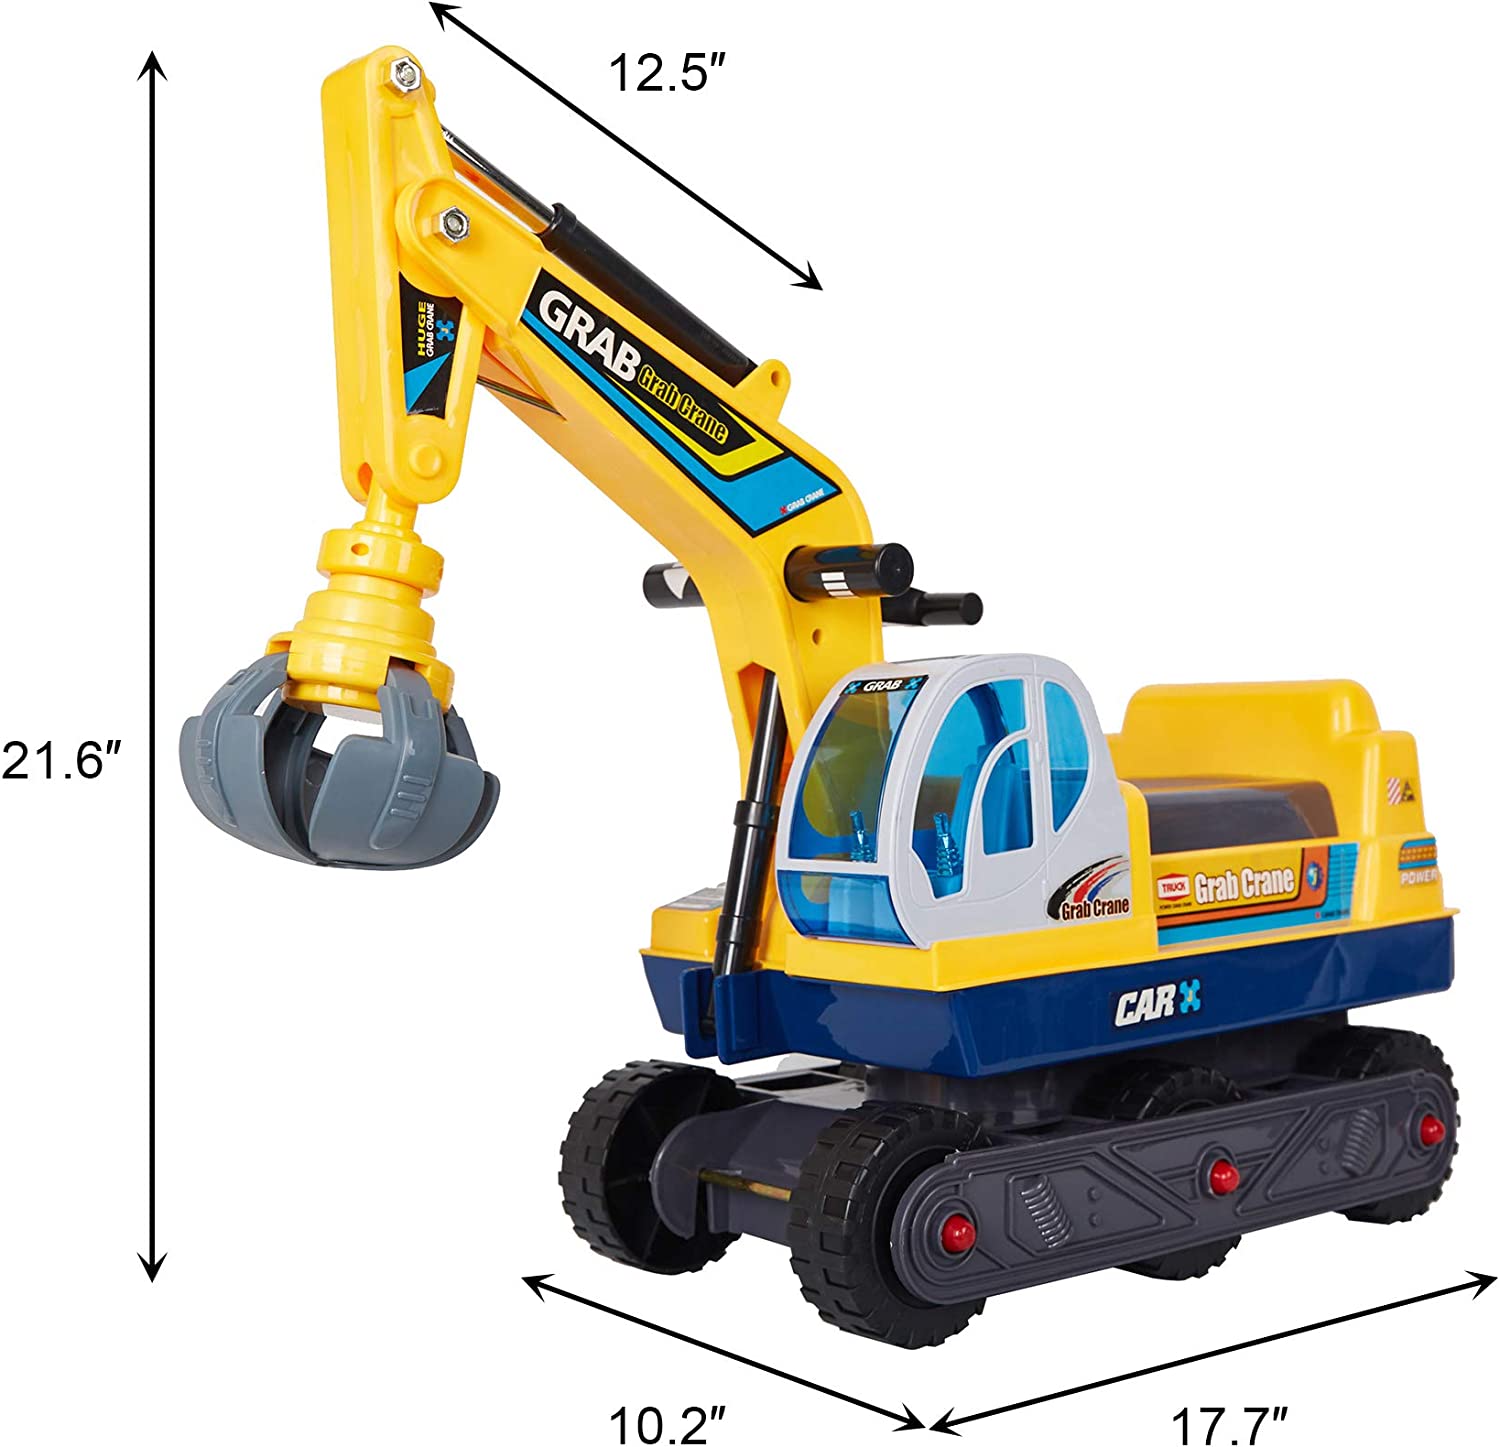 2-in-1 Kids Ride-on Crane Construction Grabber Toy with Engineering Hat